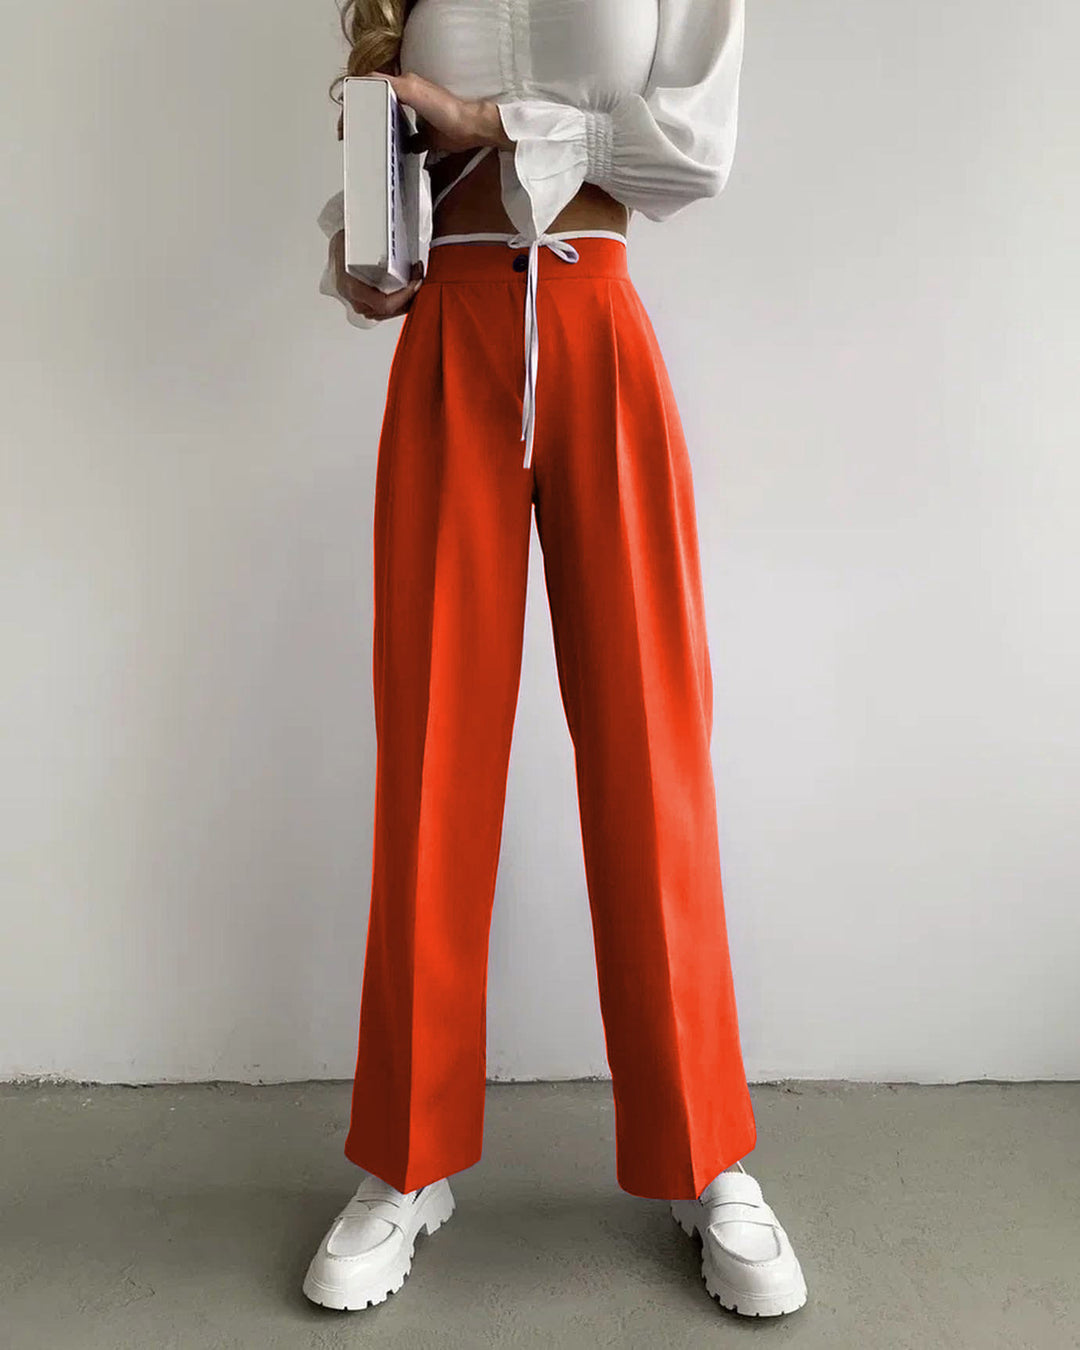 2022 Summer Women Clothing Solid Color Suit Pants Elastic Waist Casual Trousers